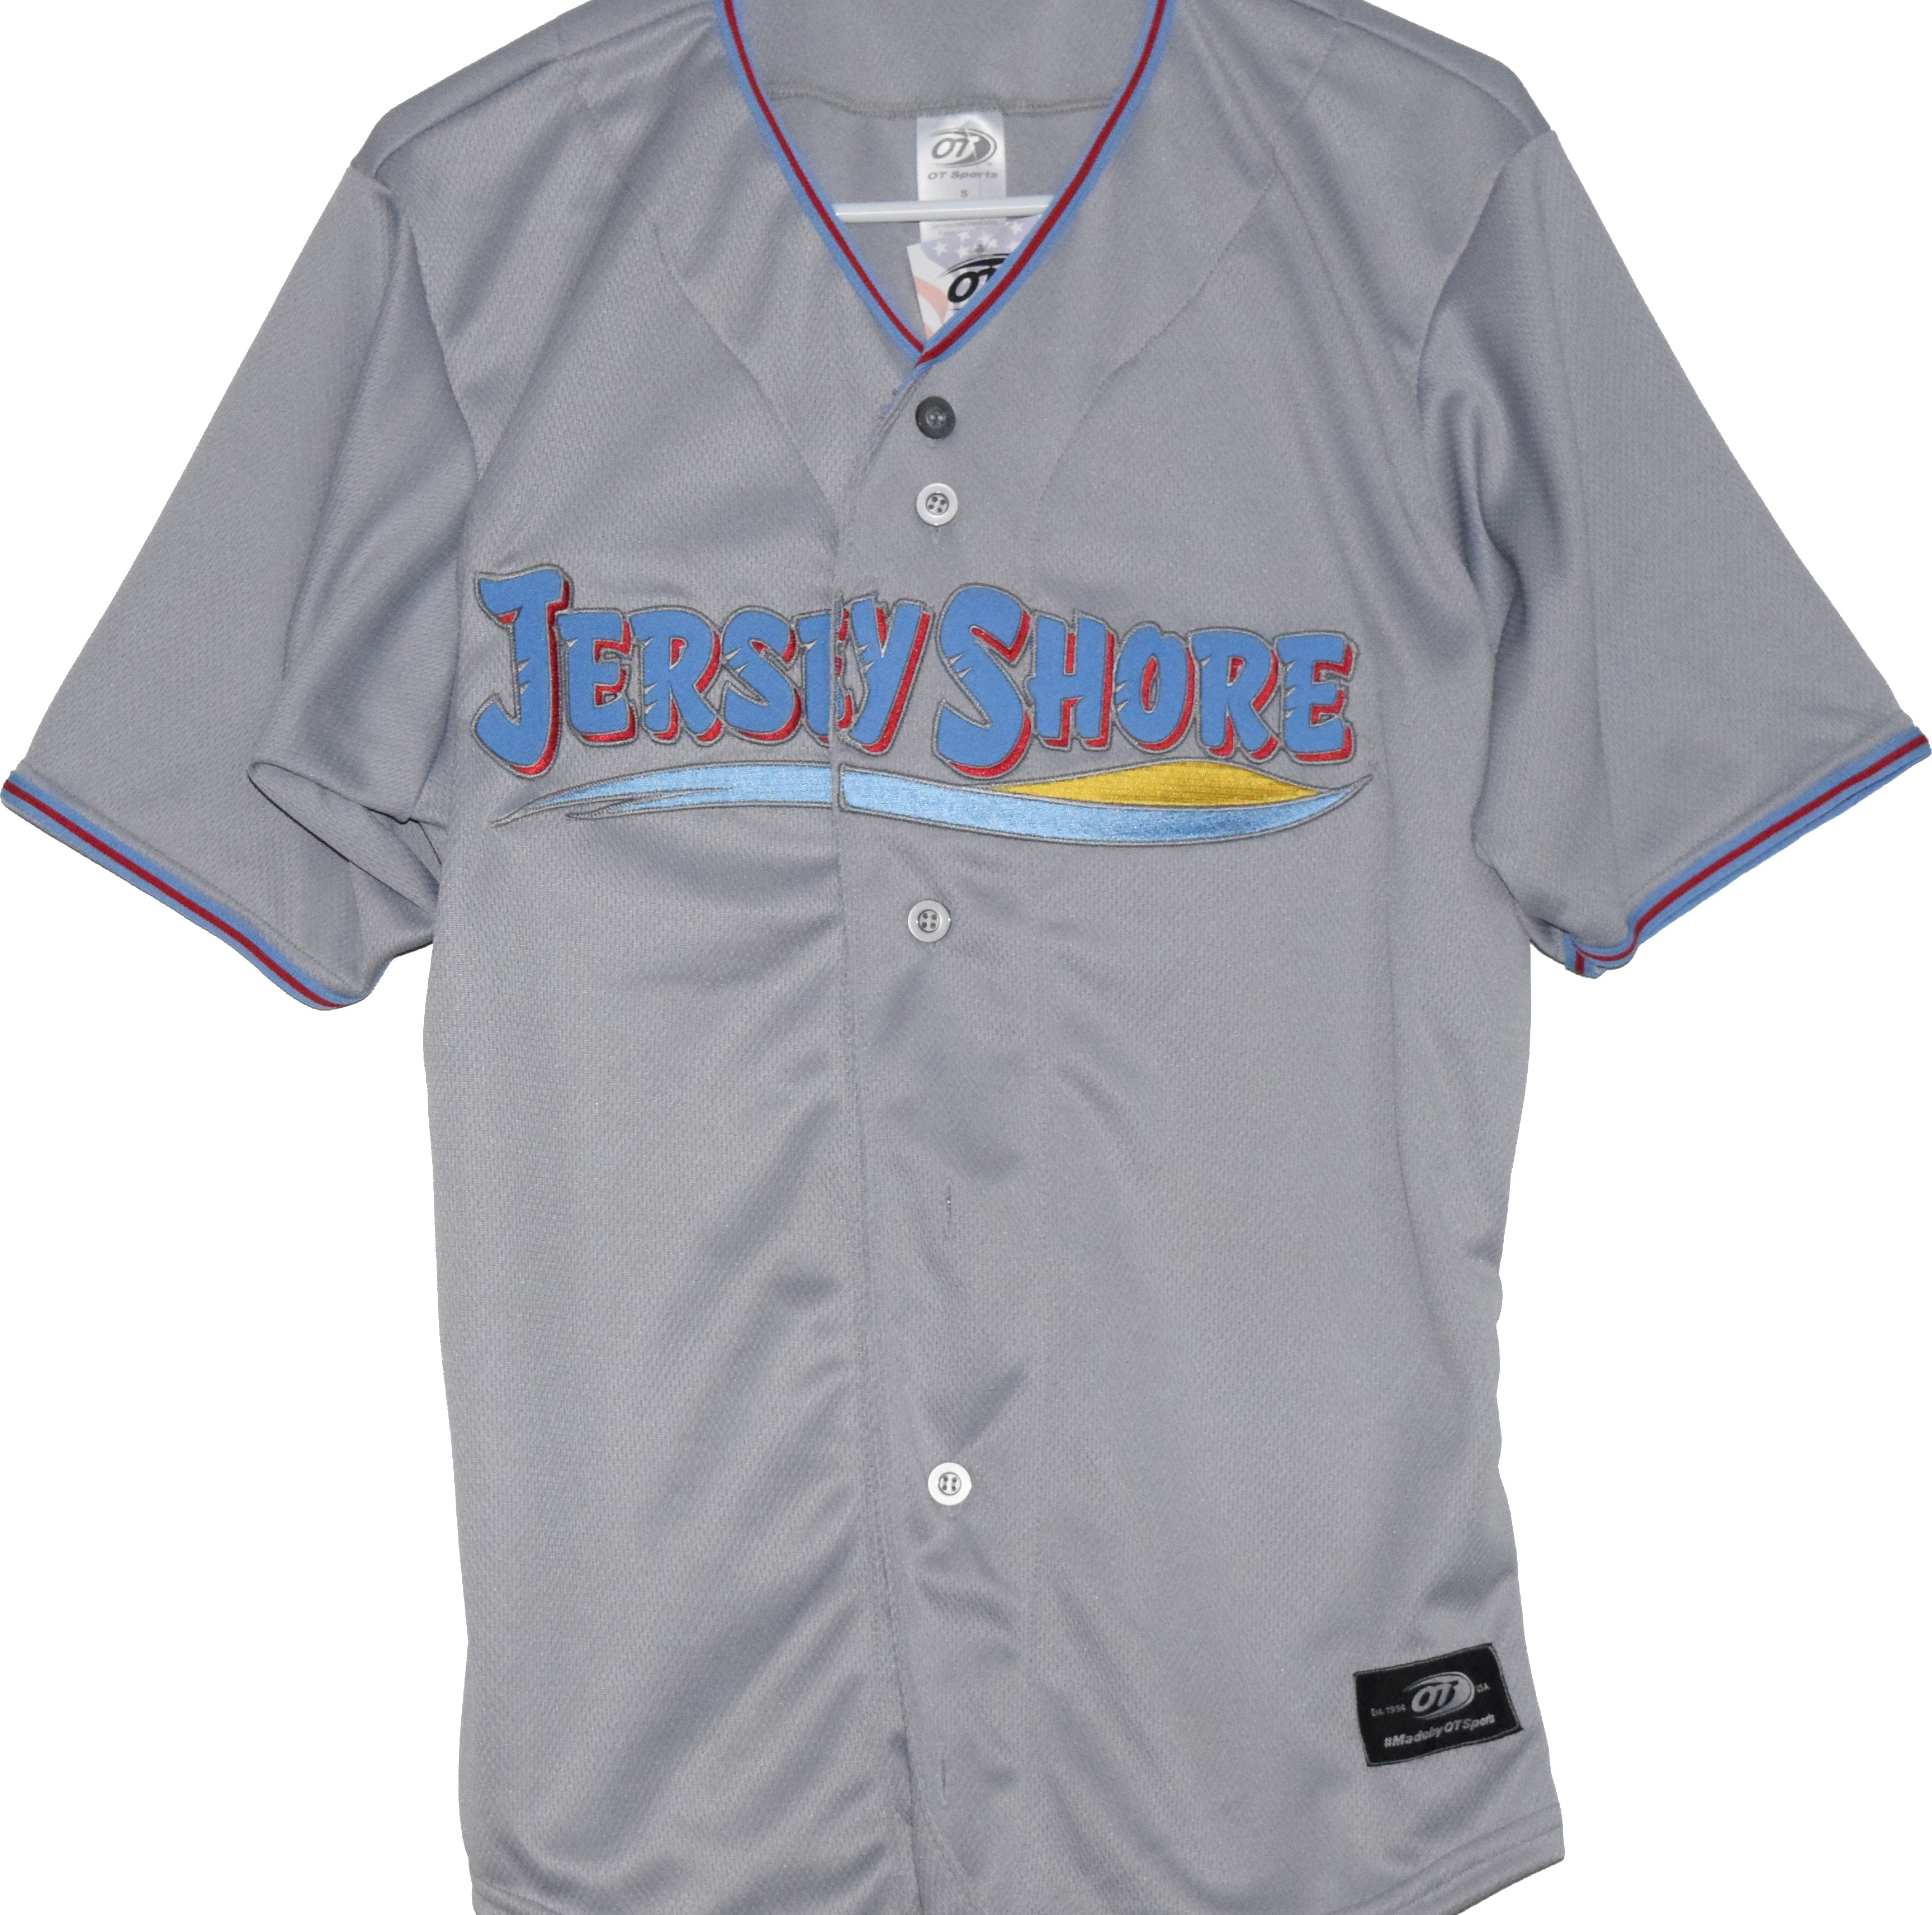 New BlueClaws Uniforms Are A Home Run - Jersey Shore Online